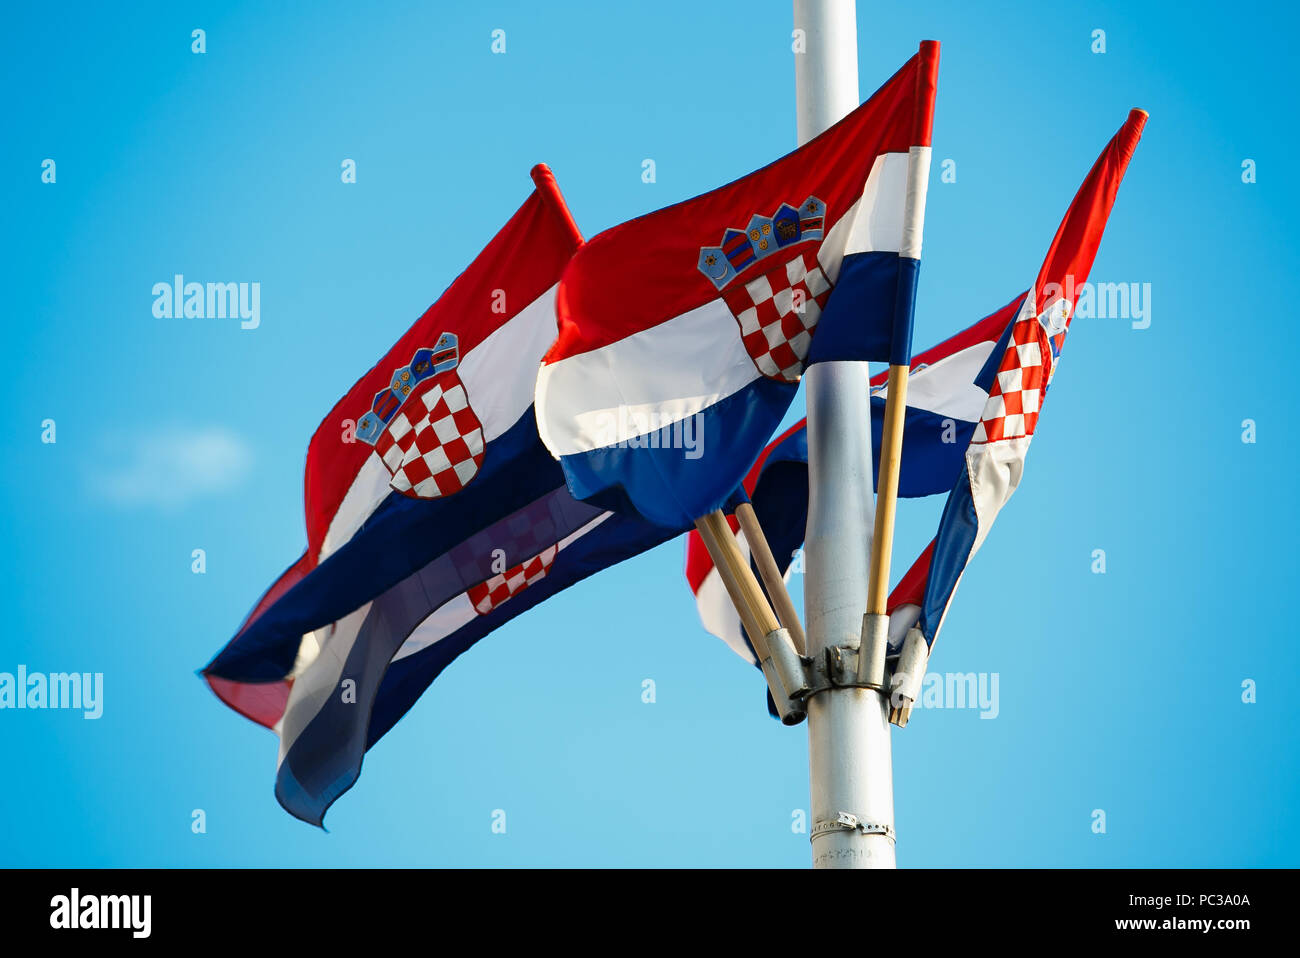 National flag of Crotia and Dalmatia region high on pole with bright blue sky on background.Traditional Croatian red,white and blue colors and symbols Stock Photo